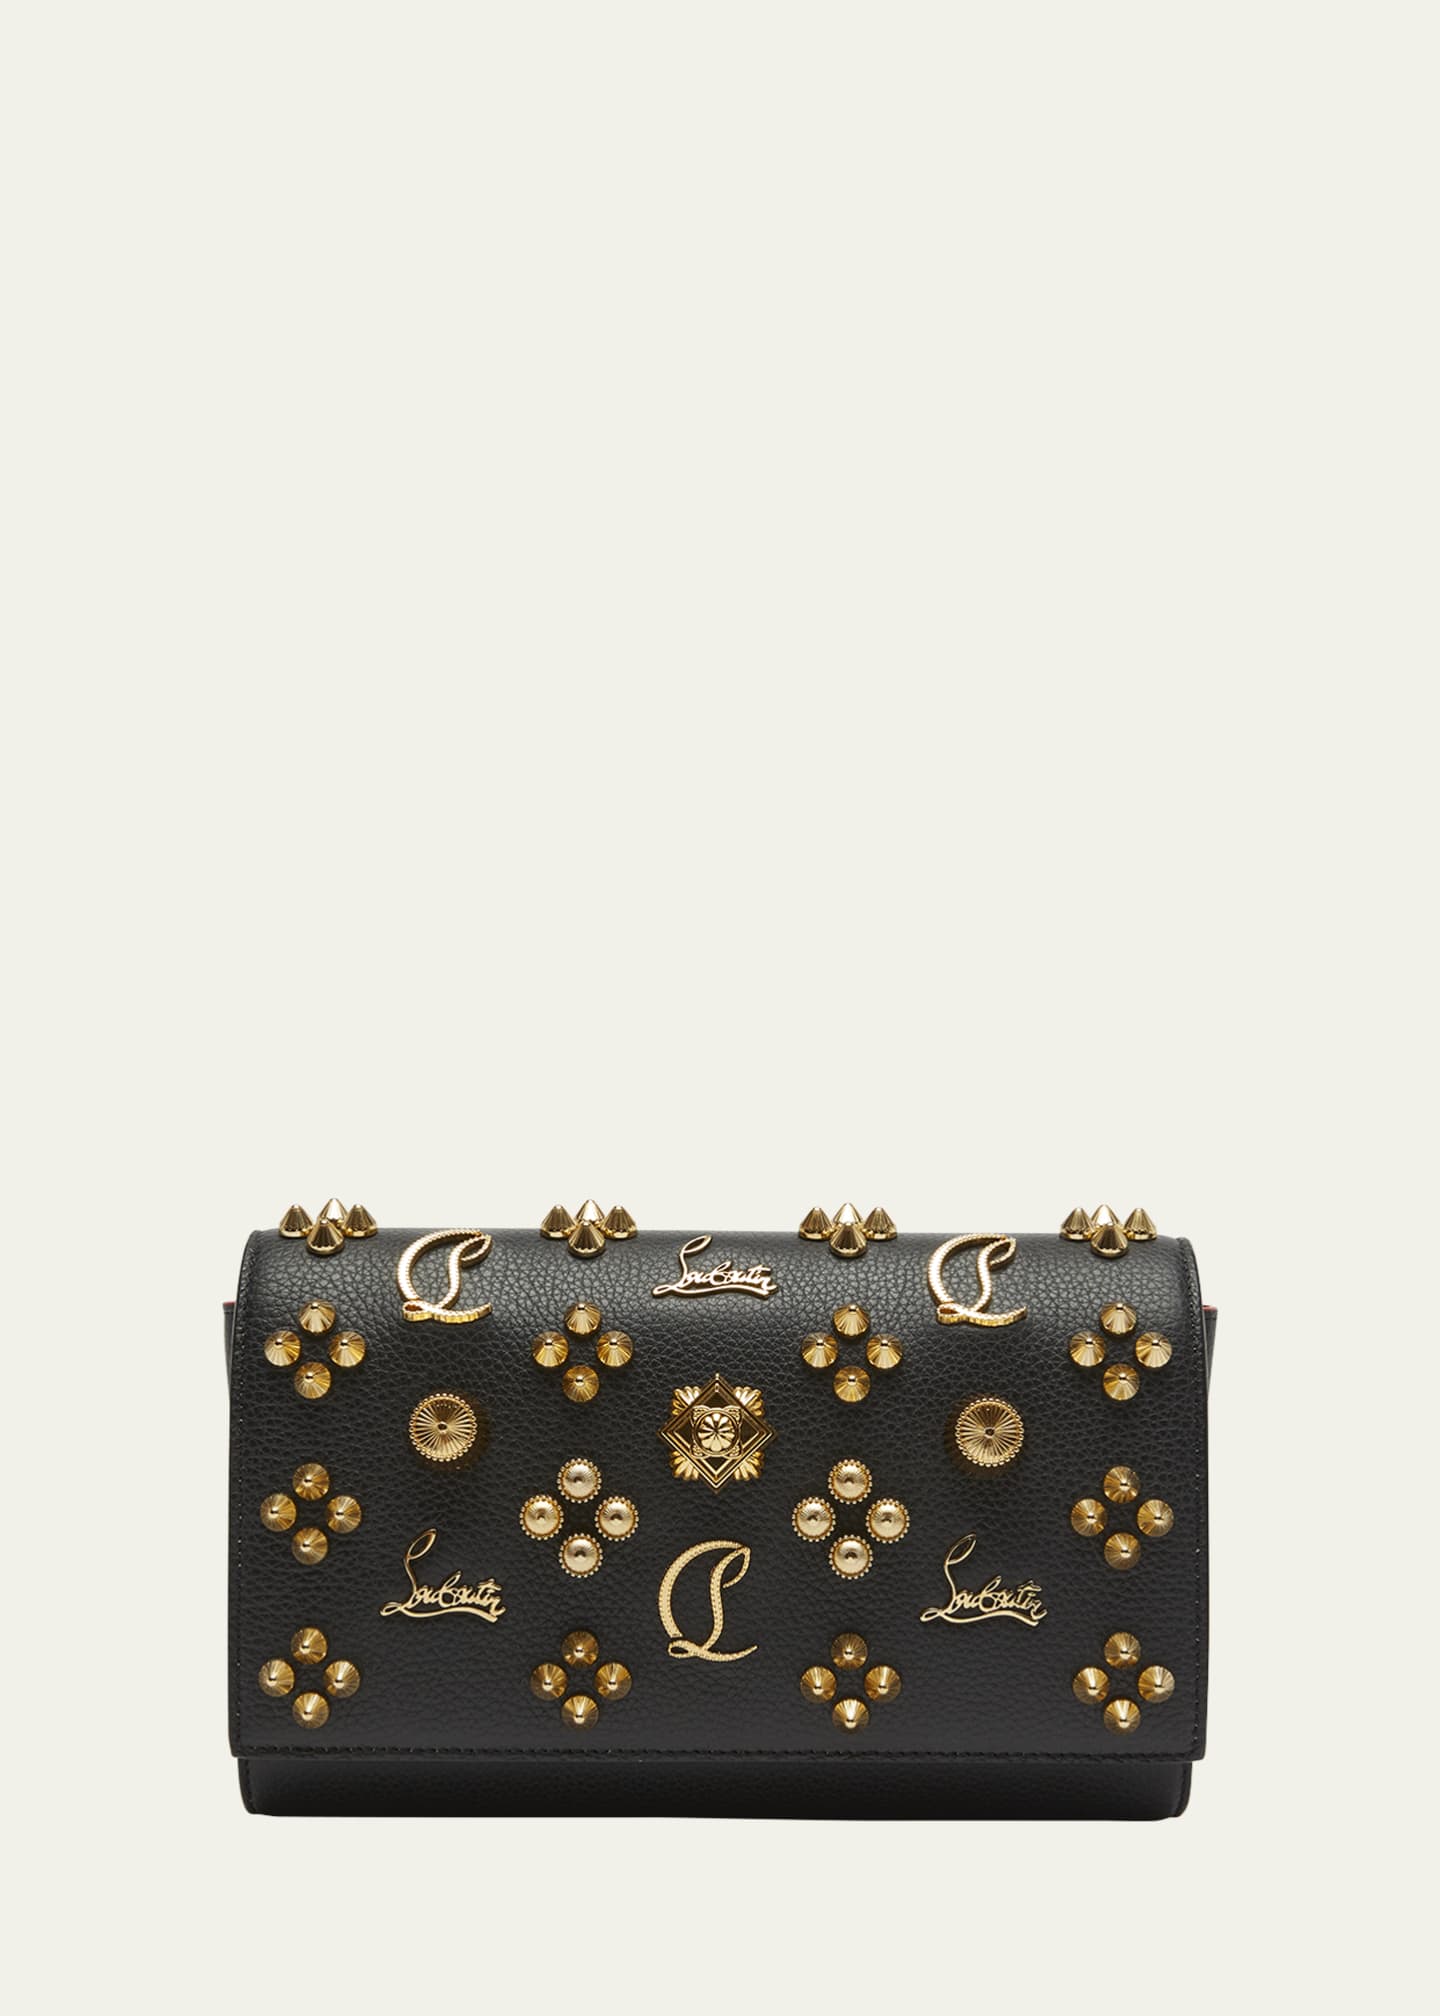 Christian Louboutin Paloma Clutch in Leather with Loubinthesky Seville  Spikes